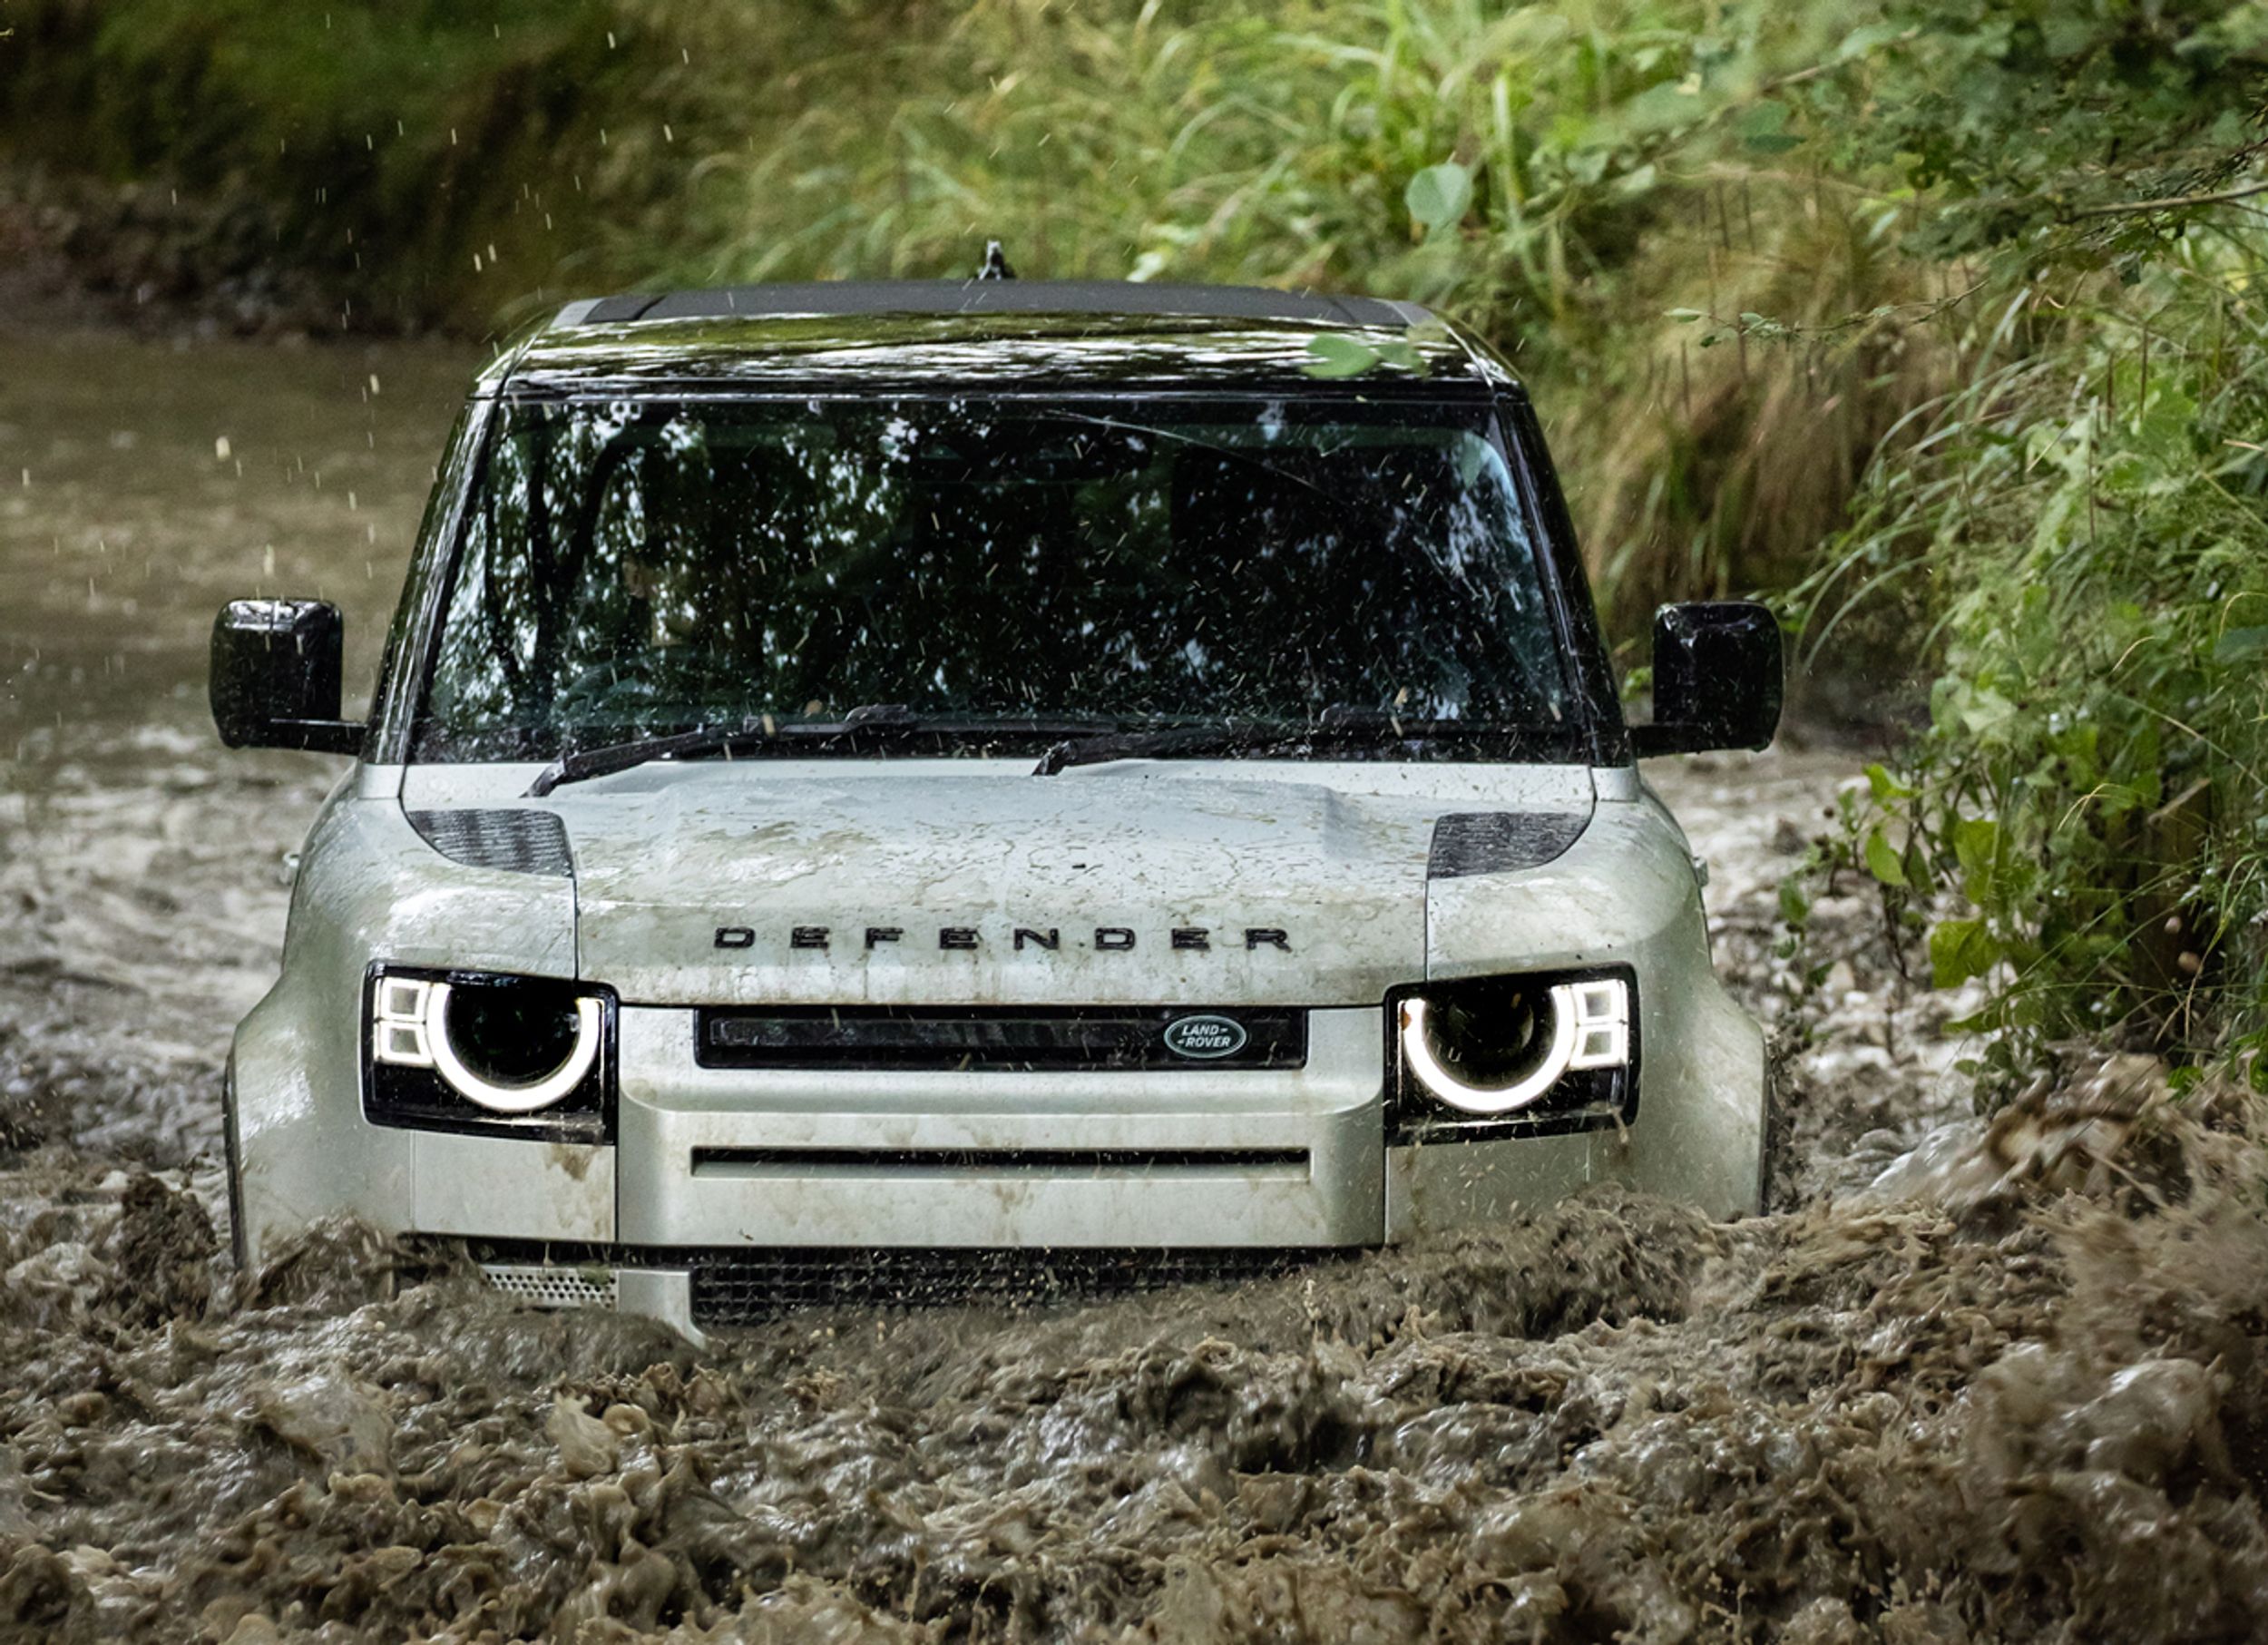 Image of the 2021 Land Rover Defender.